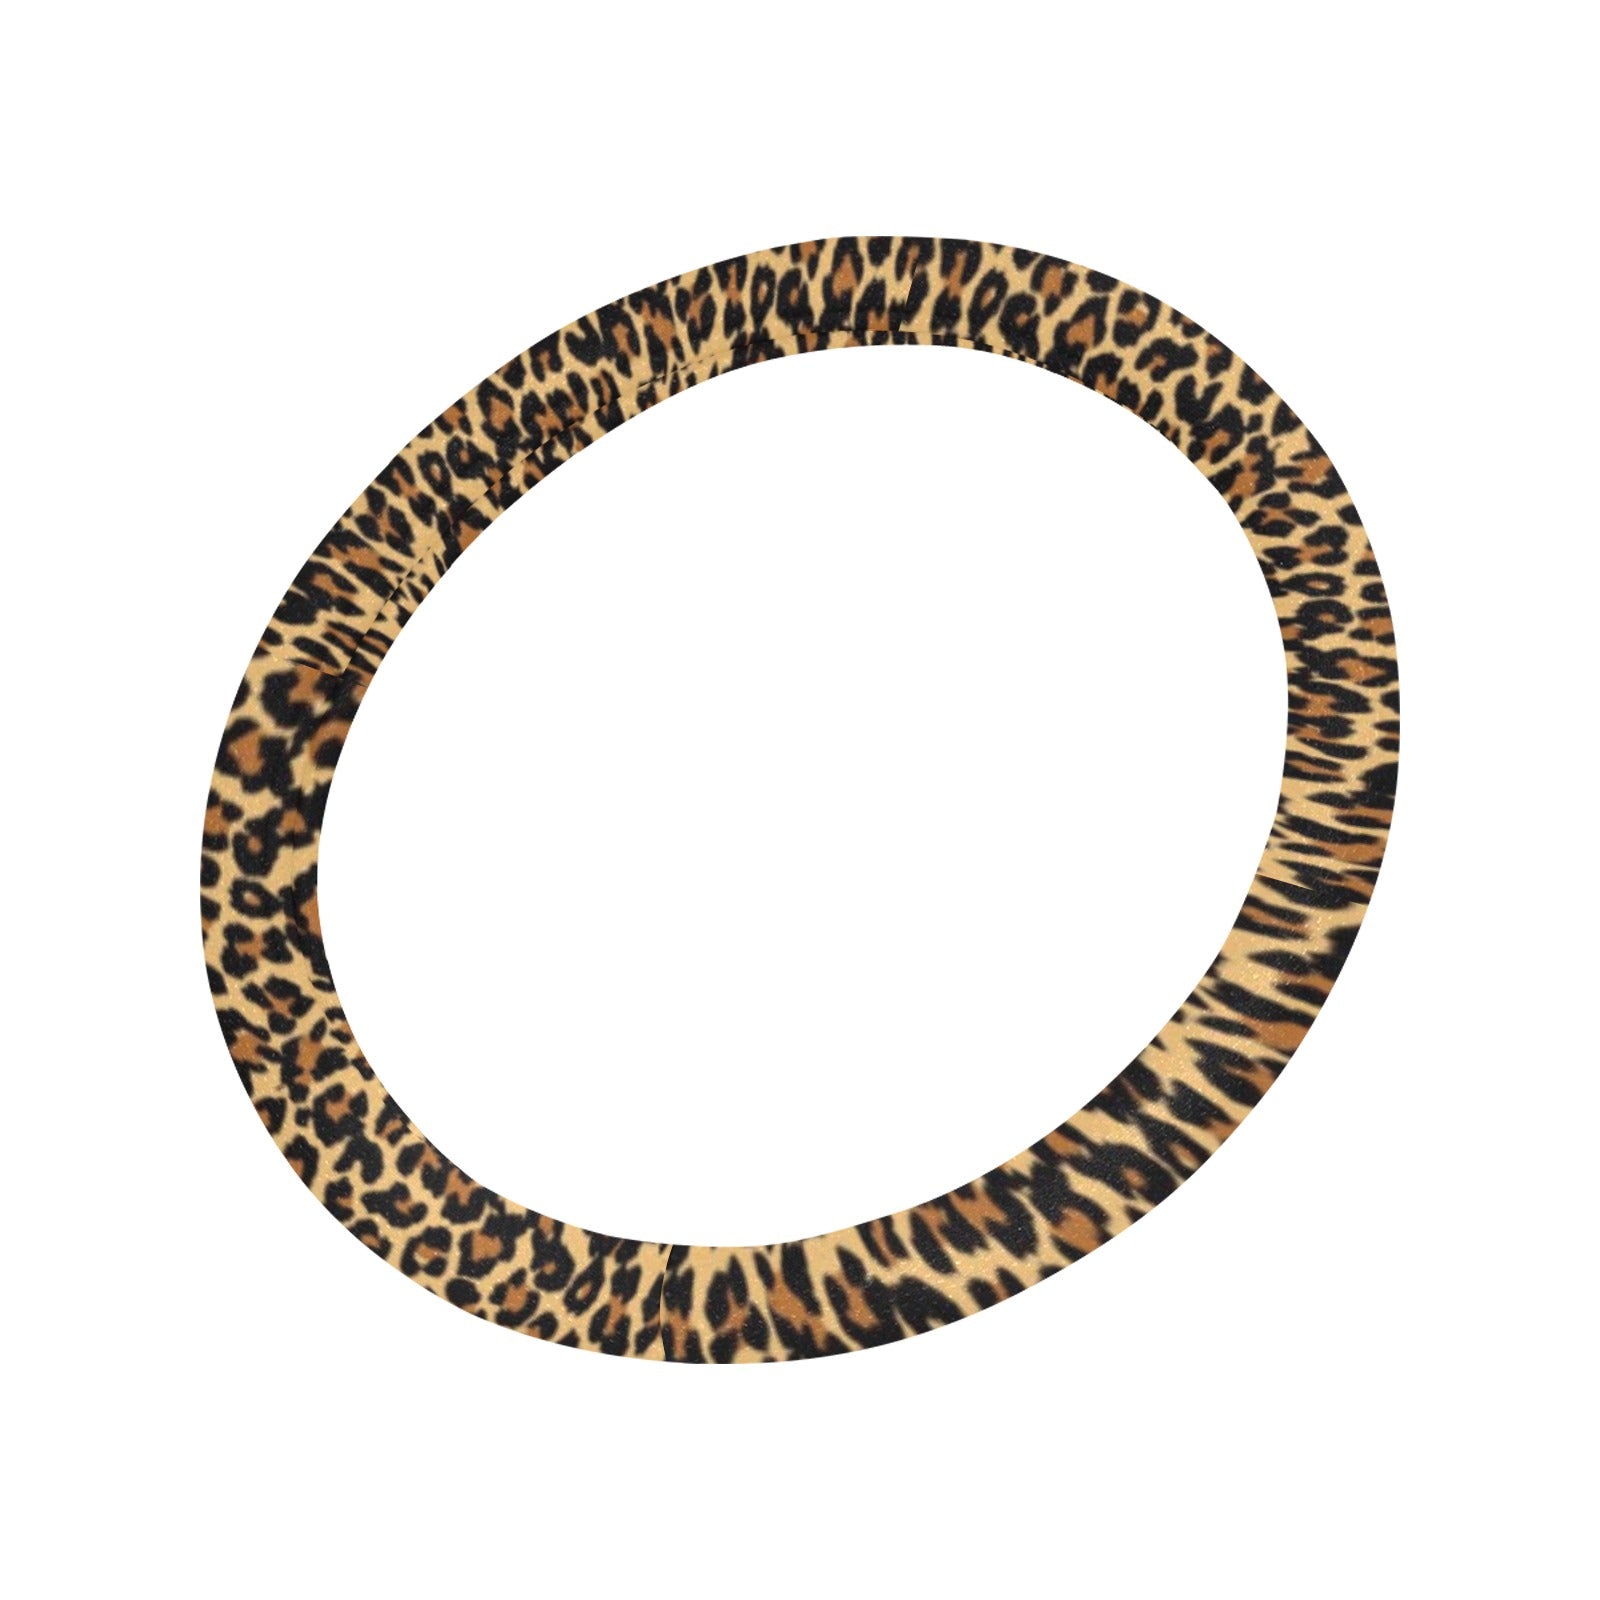 Leopard Steering Wheel Cover with Anti-Slip Insert, Brown Cheetah Animal Print Car Auto Wrap Women Protector Accessories Starcove Fashion